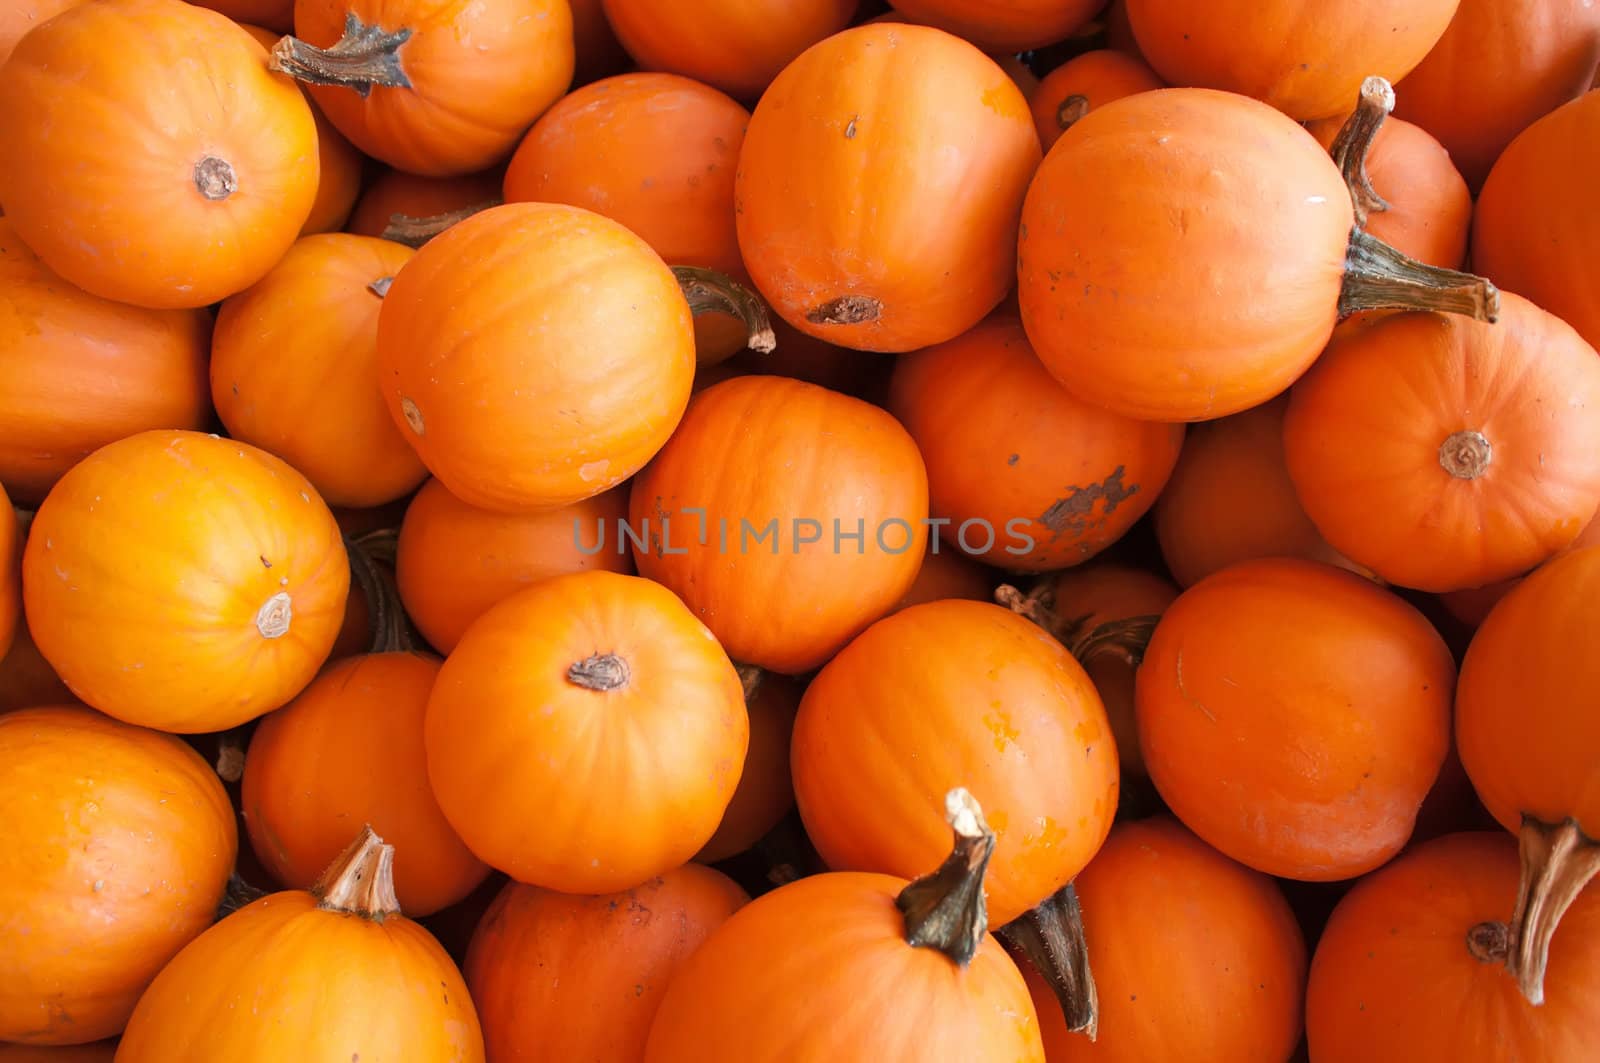 Pumpkins in pumpkin patch waiting to be sold